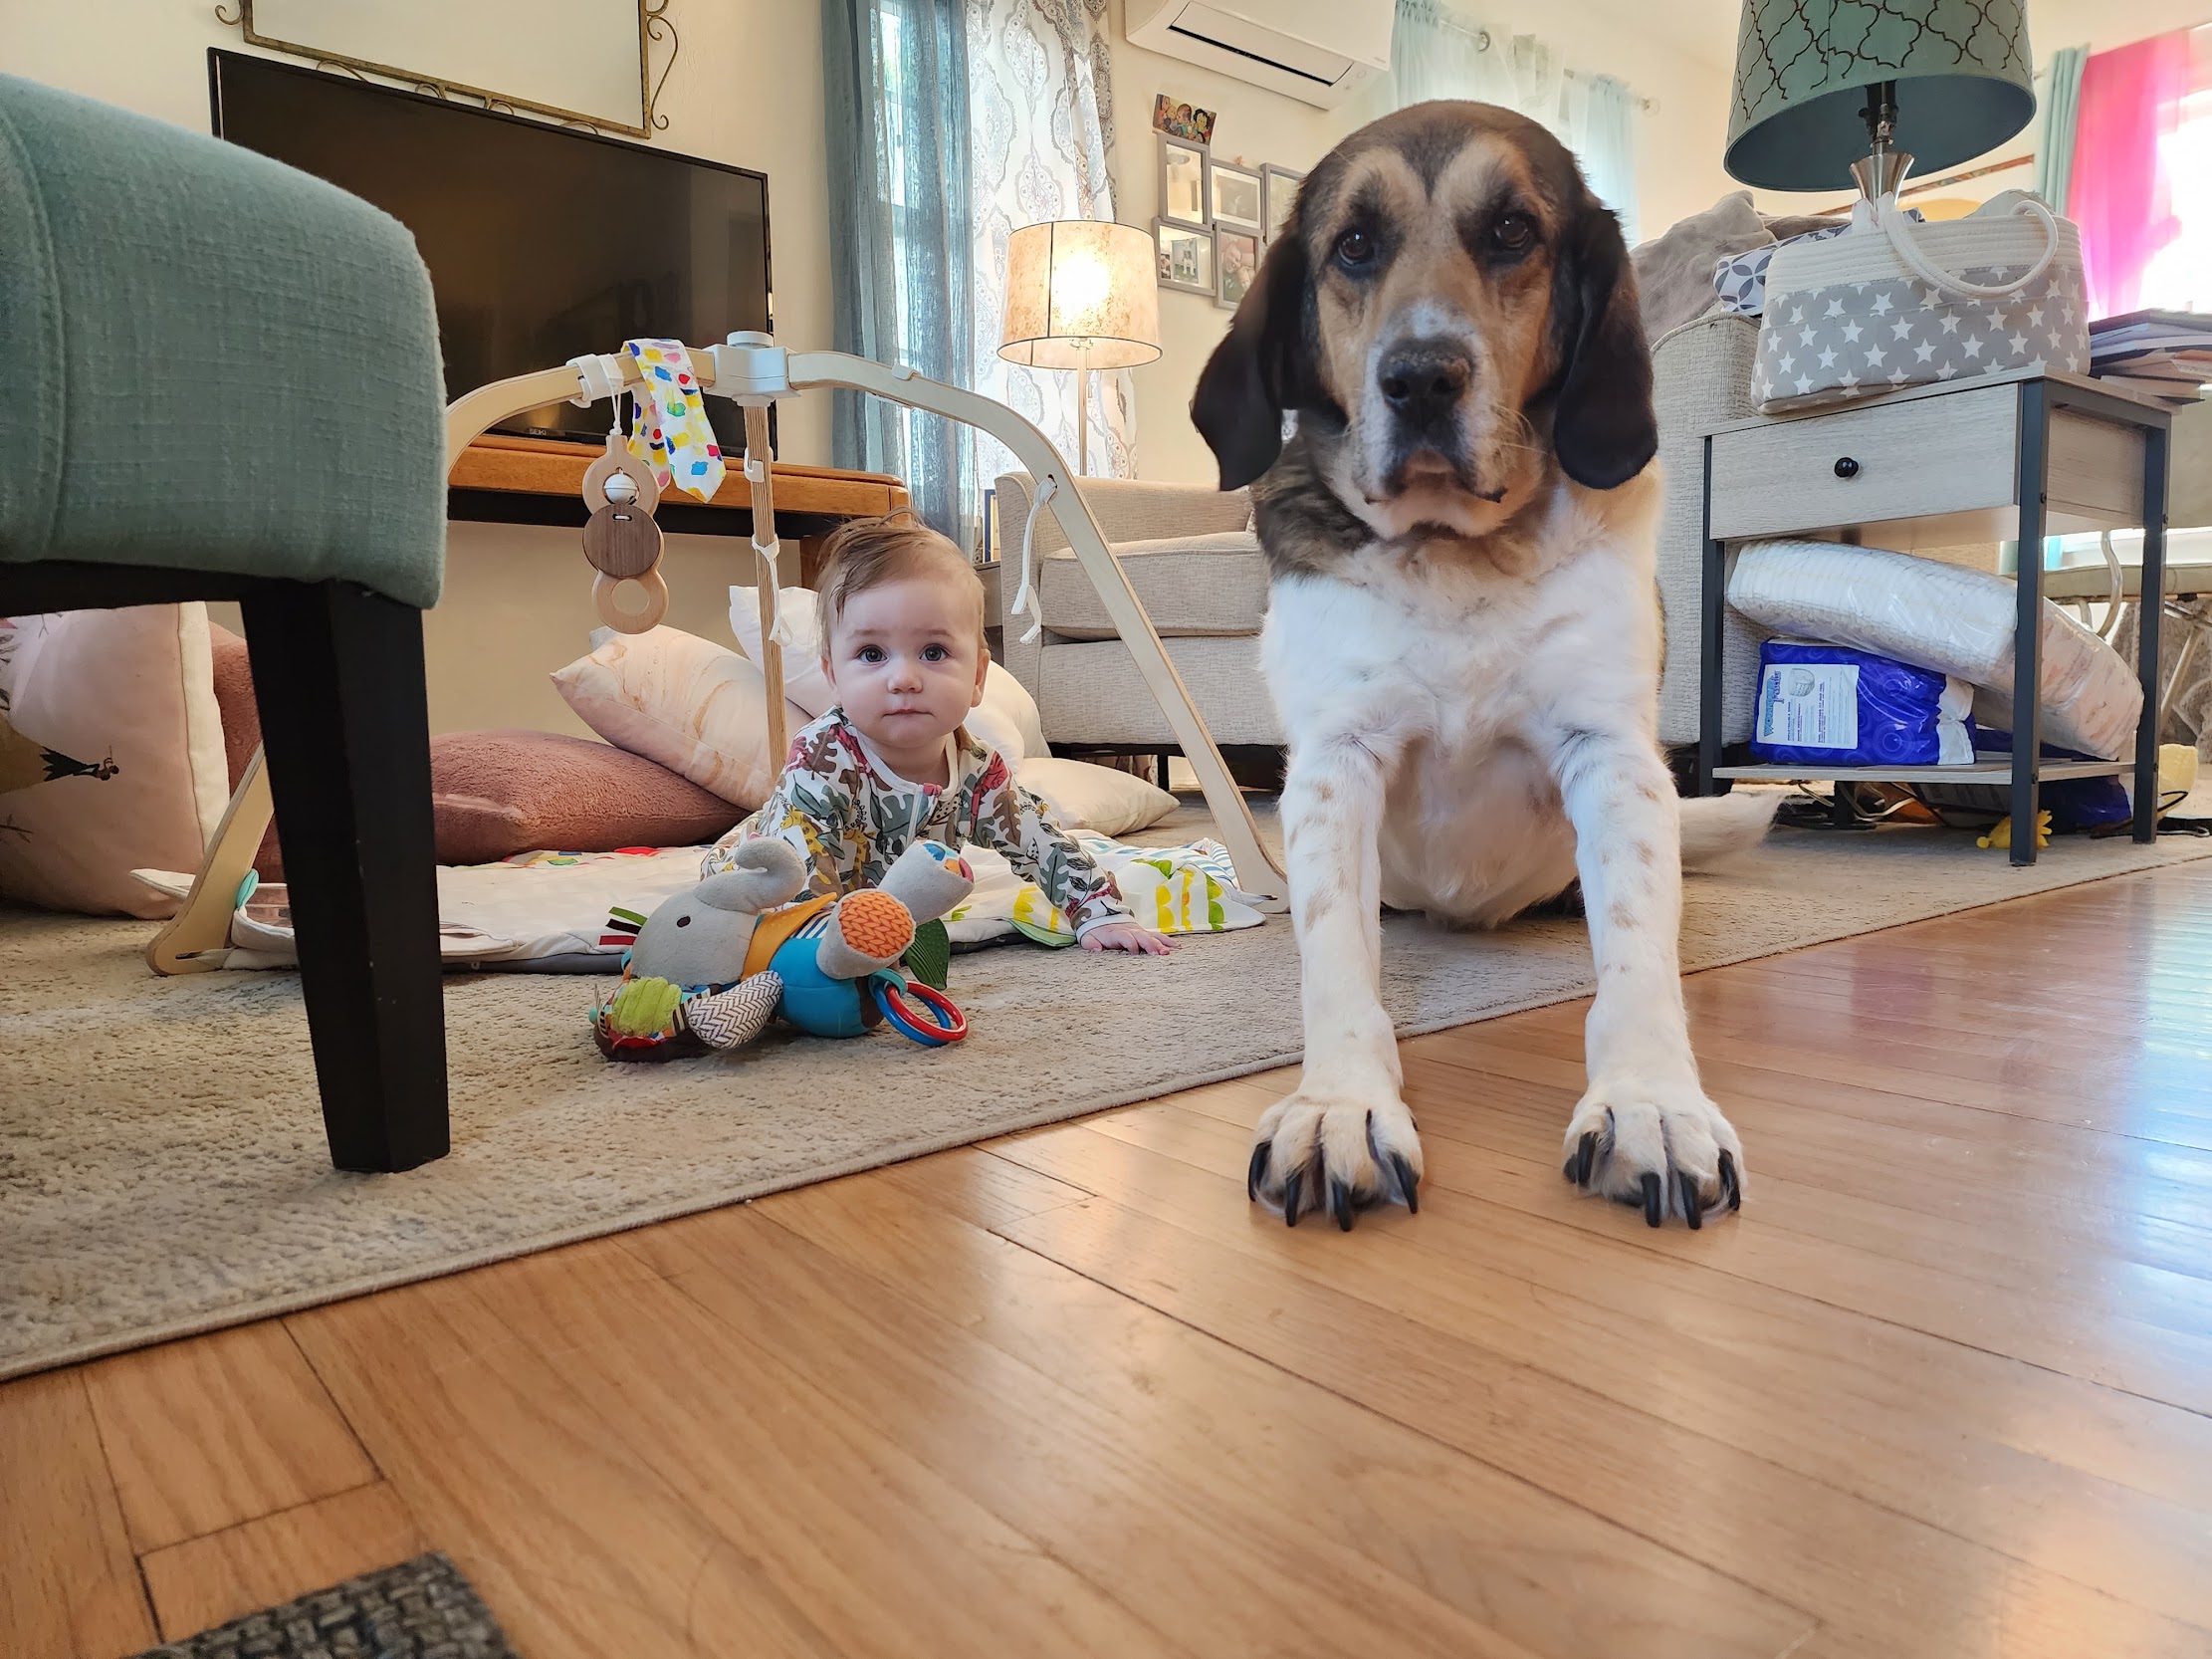 a dog and baby on the floor